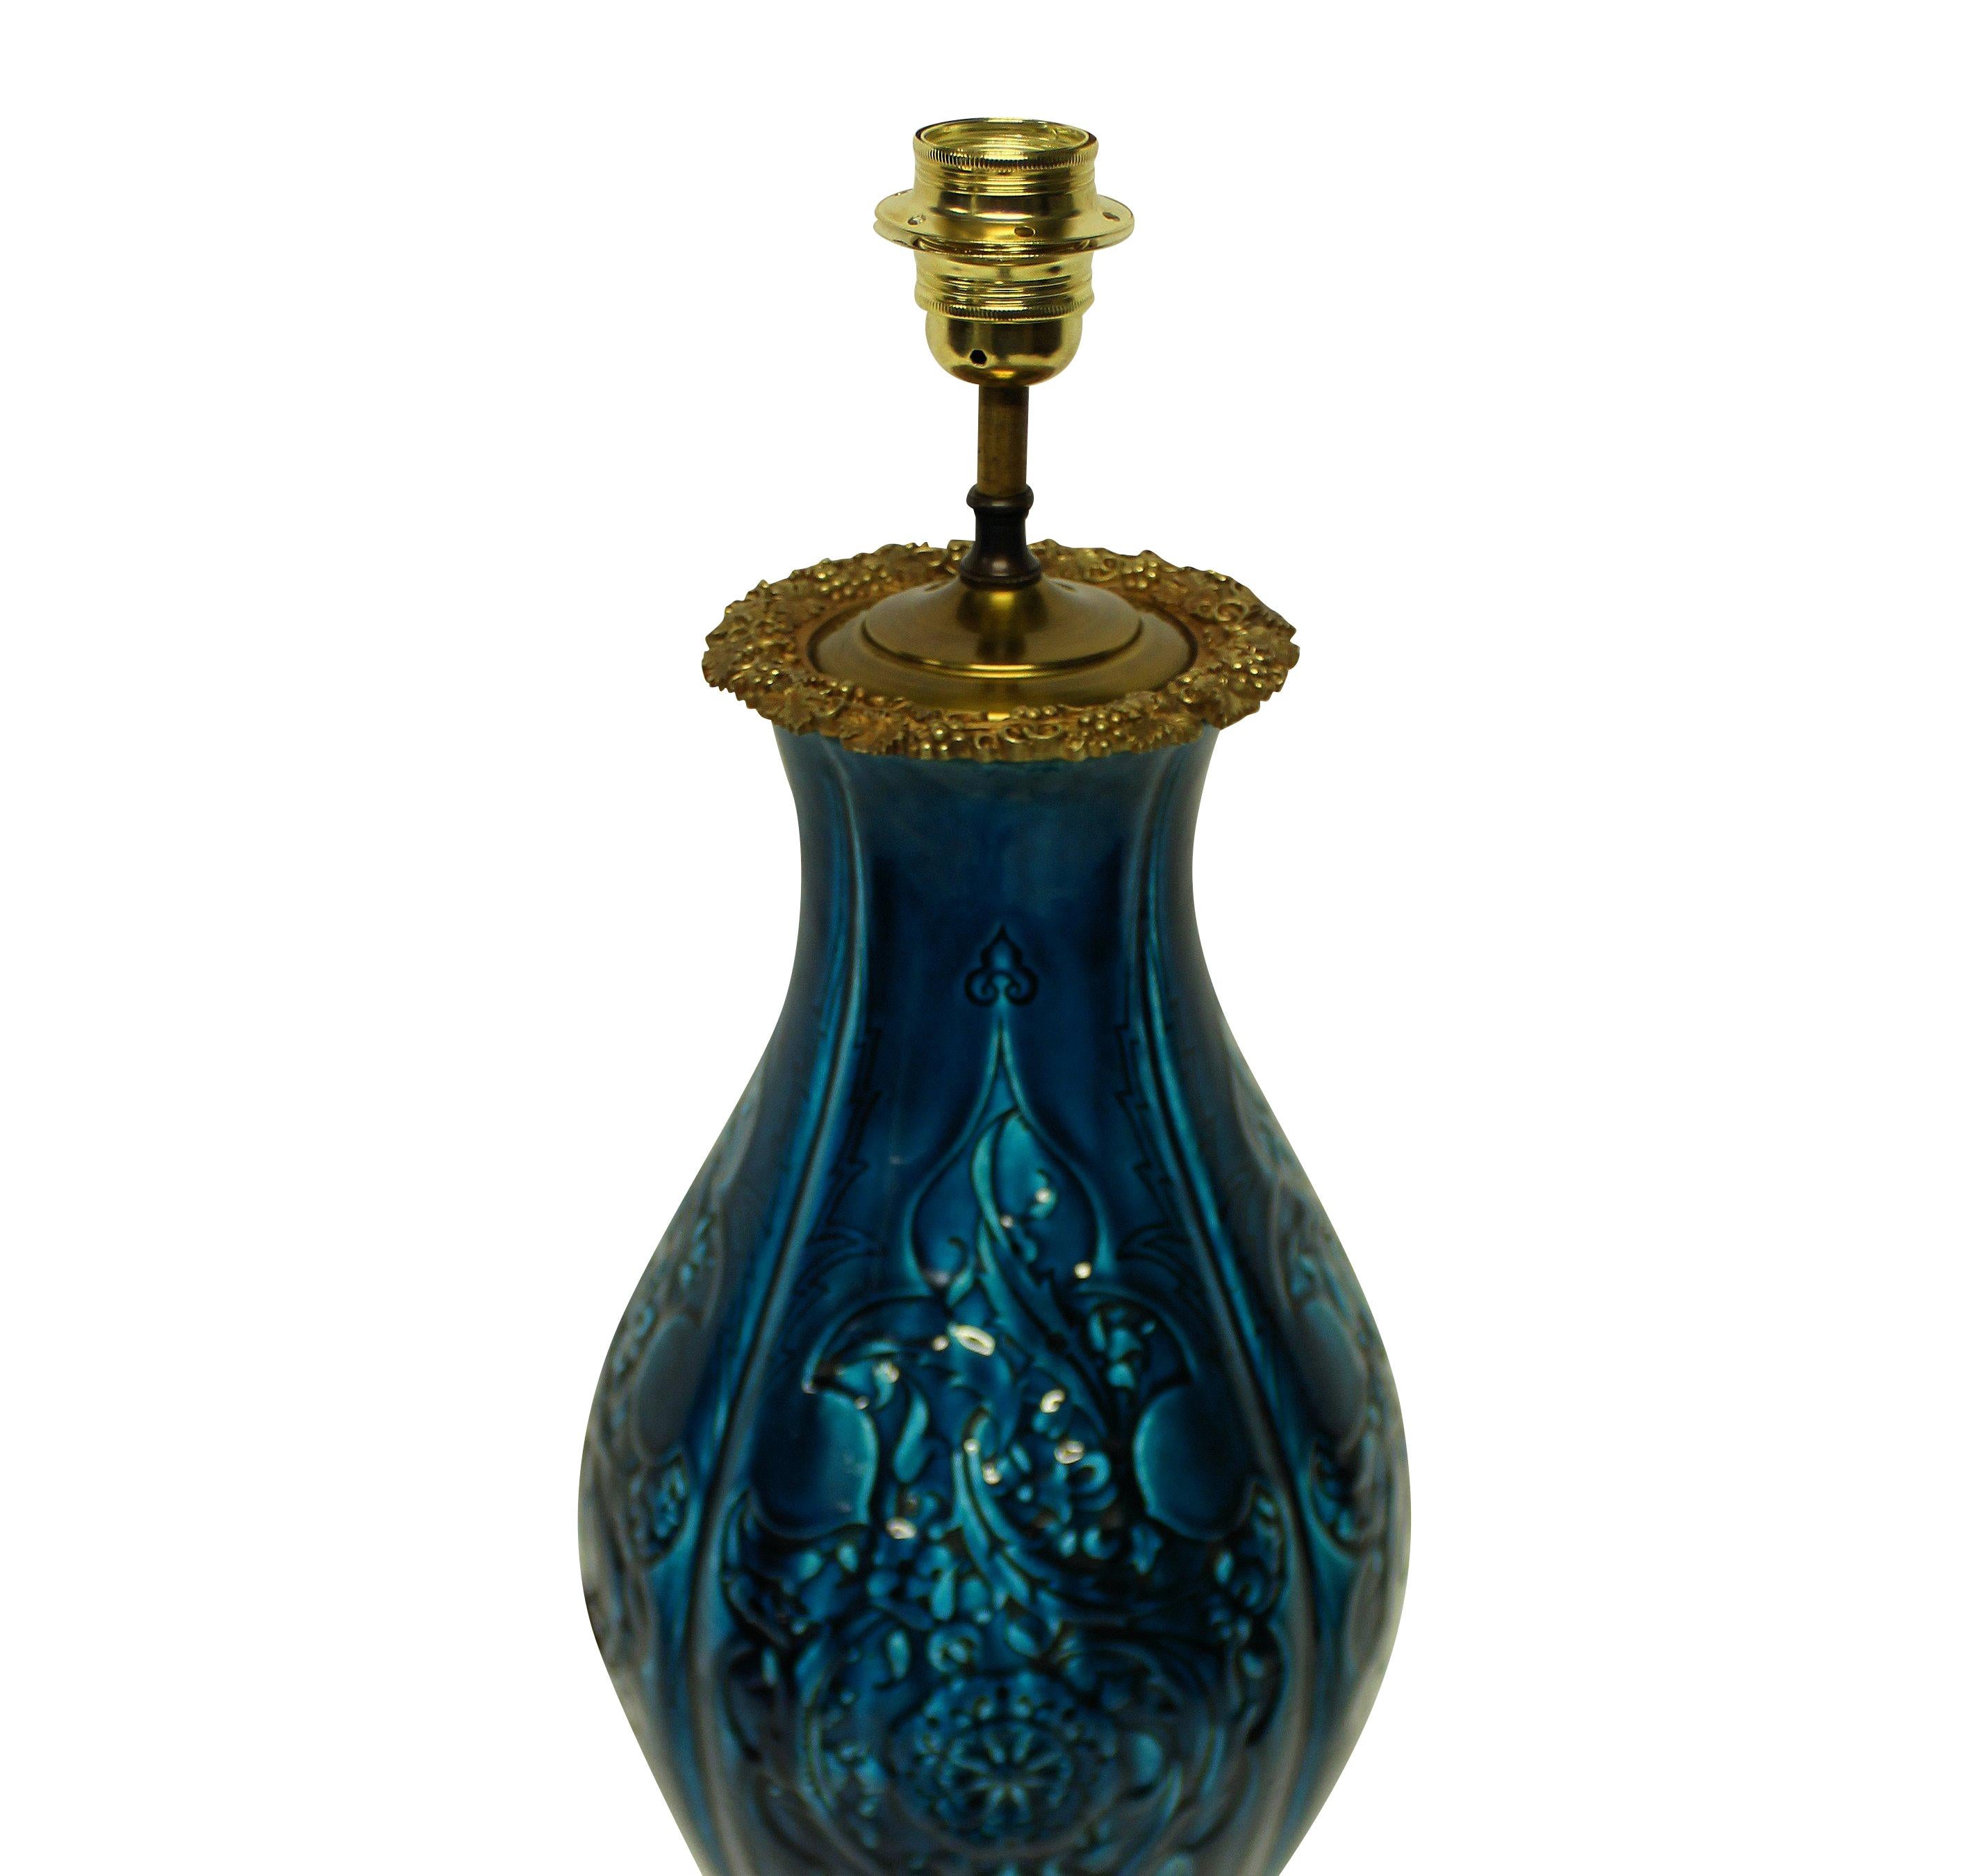 A Chinese blue glazed ceramic vase, mounted on an ormolu stand and converted into a lamp.